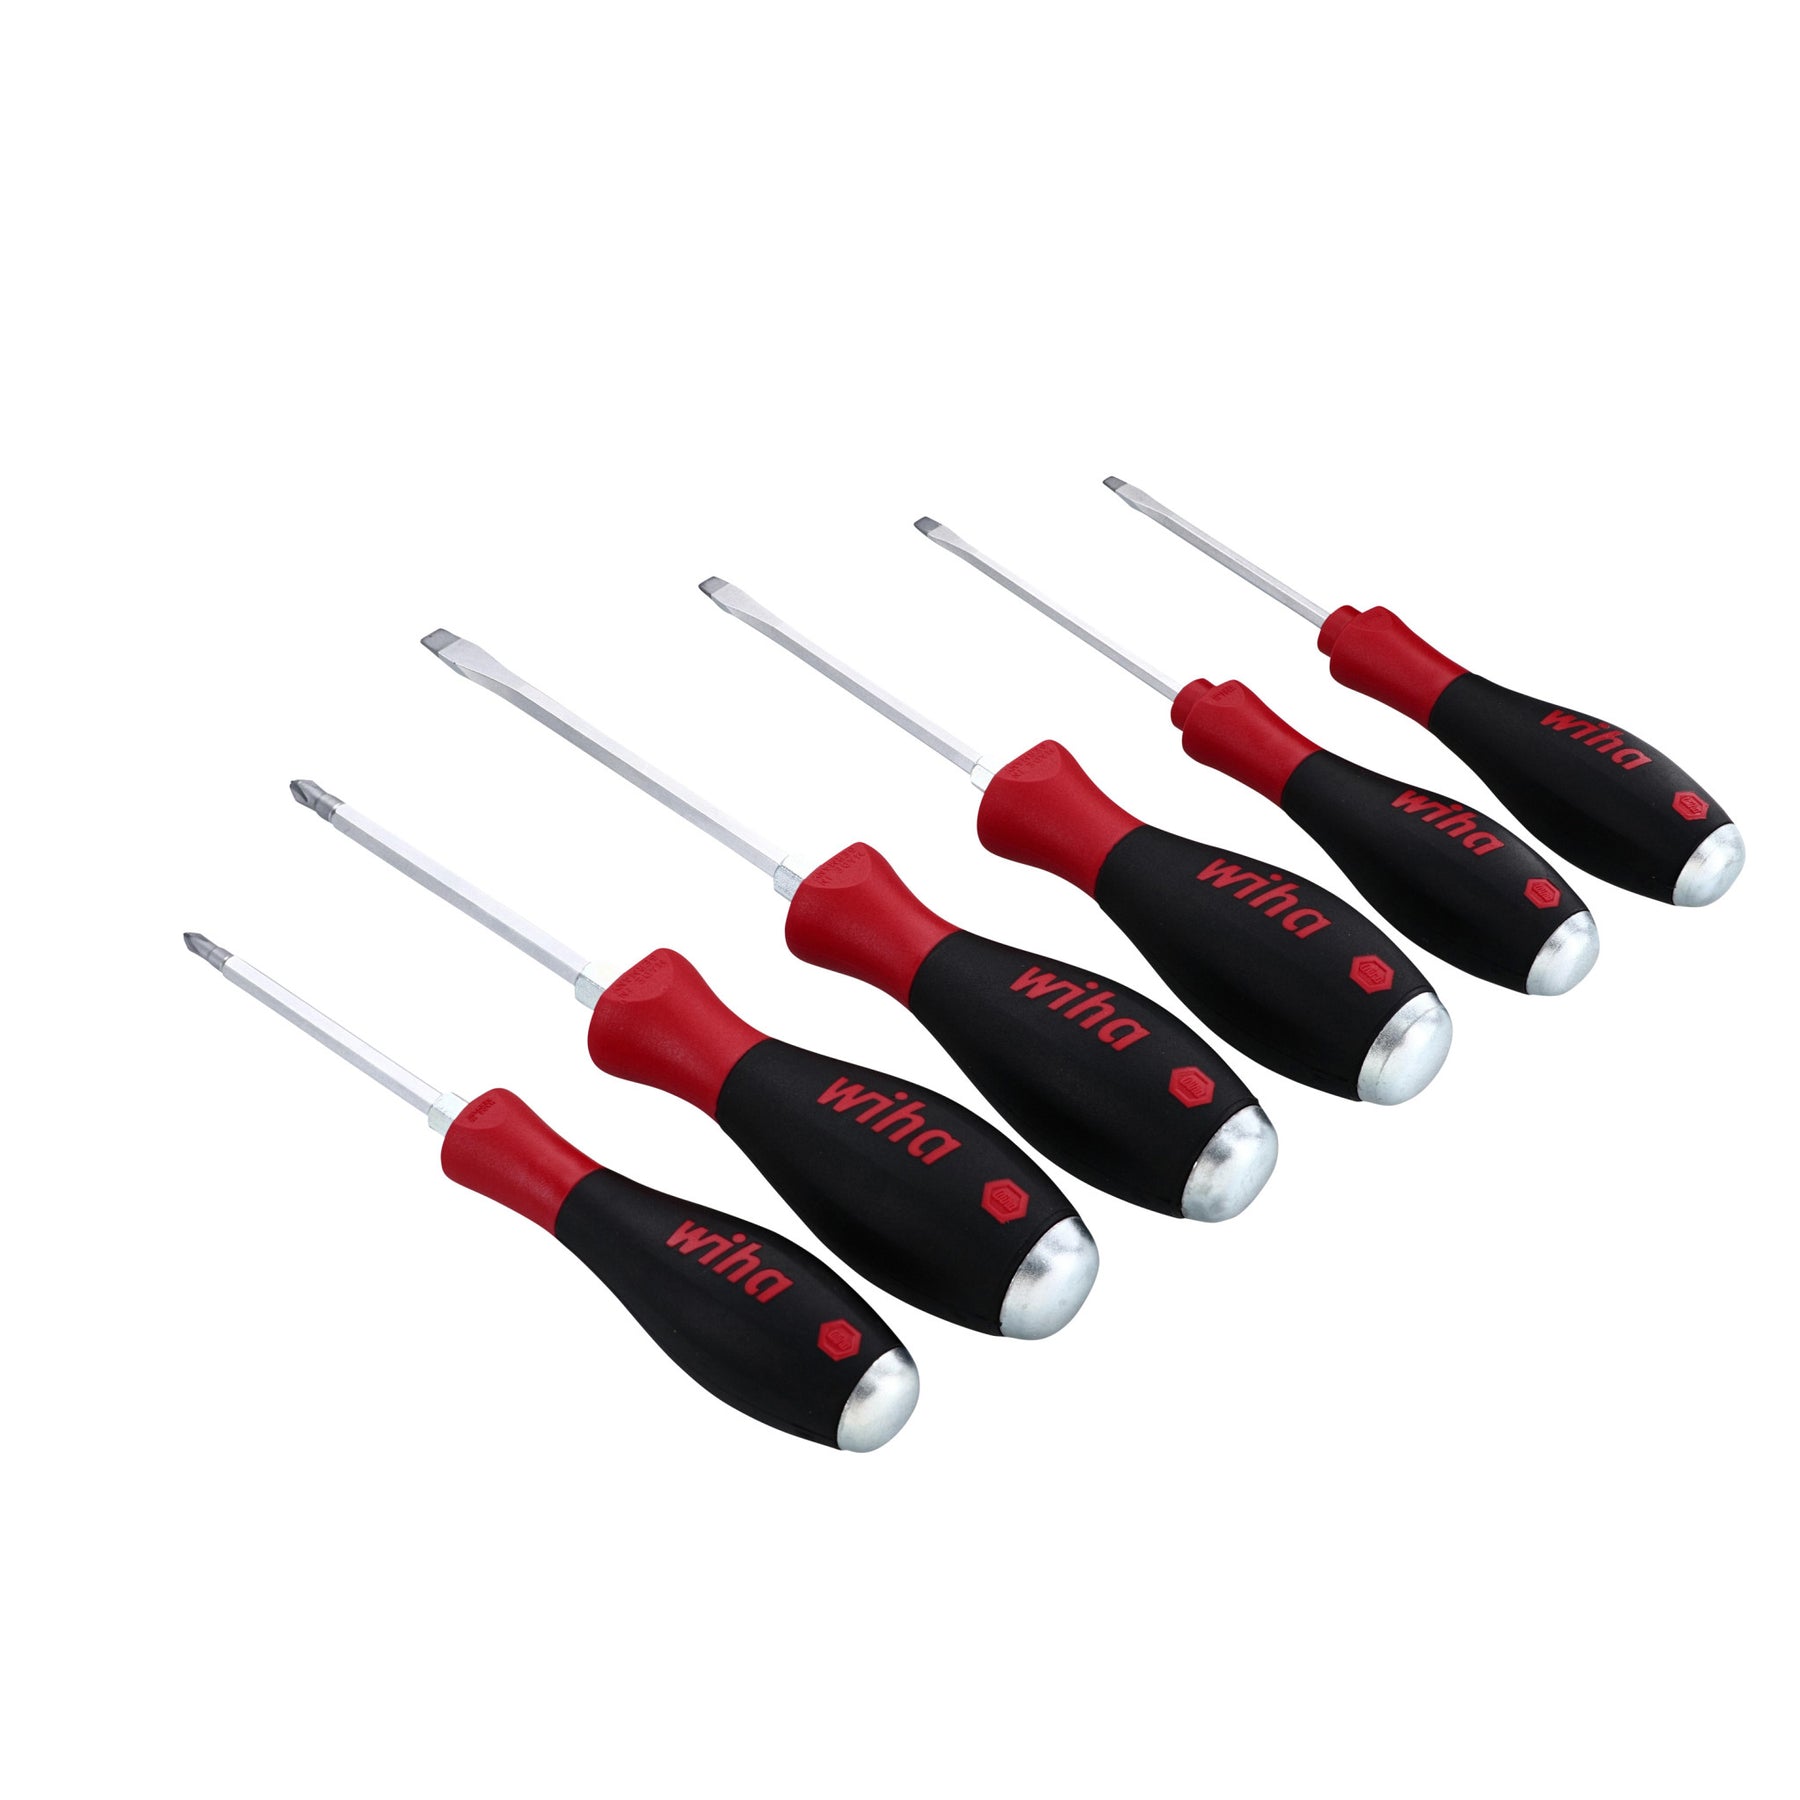 Wiha 53096 6 Piece SoftFinish X Heavy Duty Slotted and Phillips Screwdriver Set